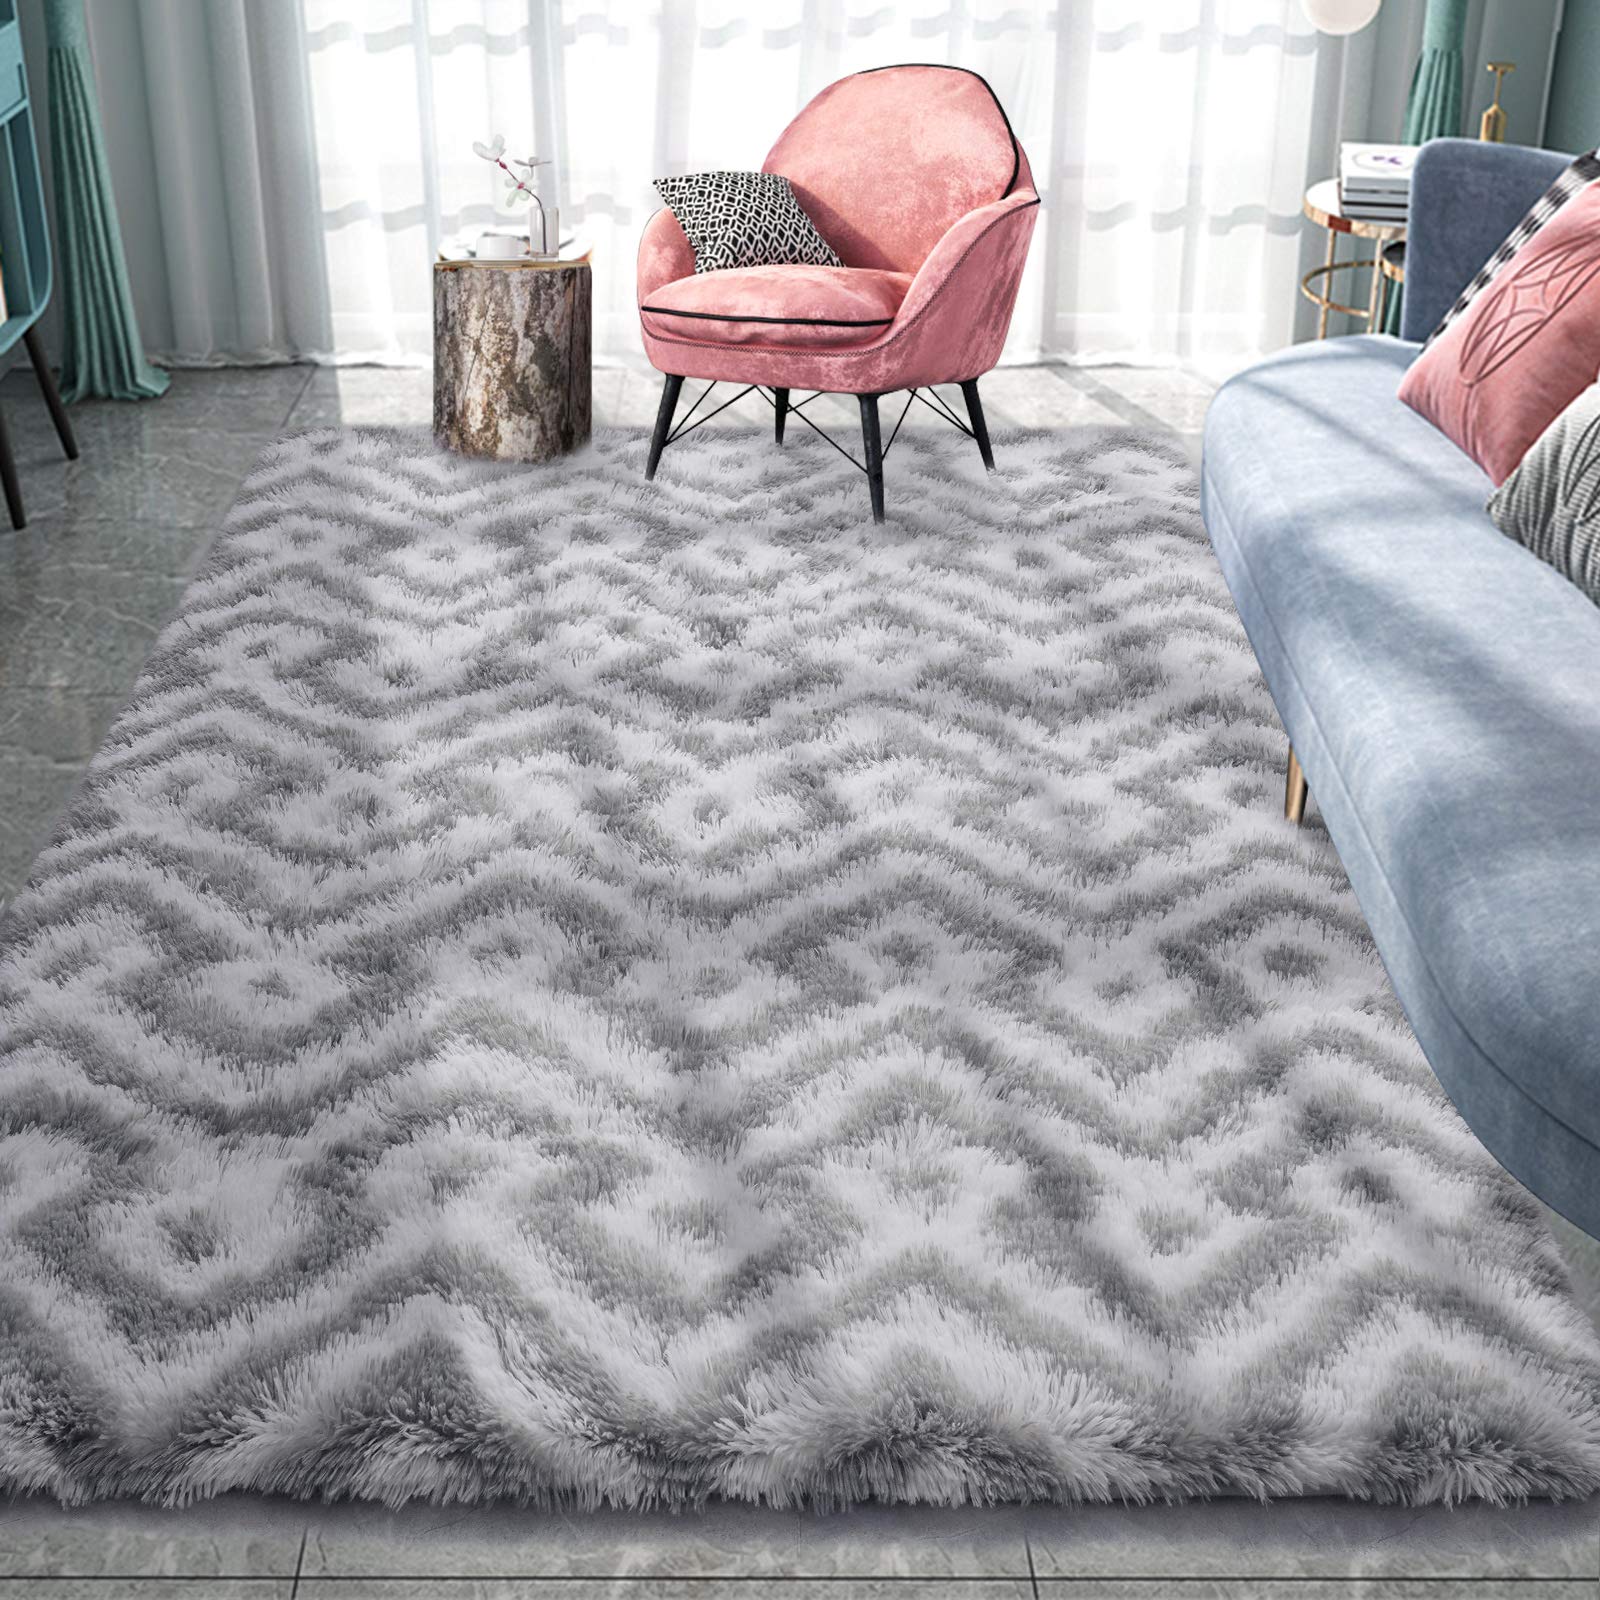 Pacapet Fluffy Area Rugs, Geometric Shag Rug for Bedroom, Plush Furry Rugs for Living Room, Fuzzy Carpet for Kid's Room, Nursery, Home Decor, 5...